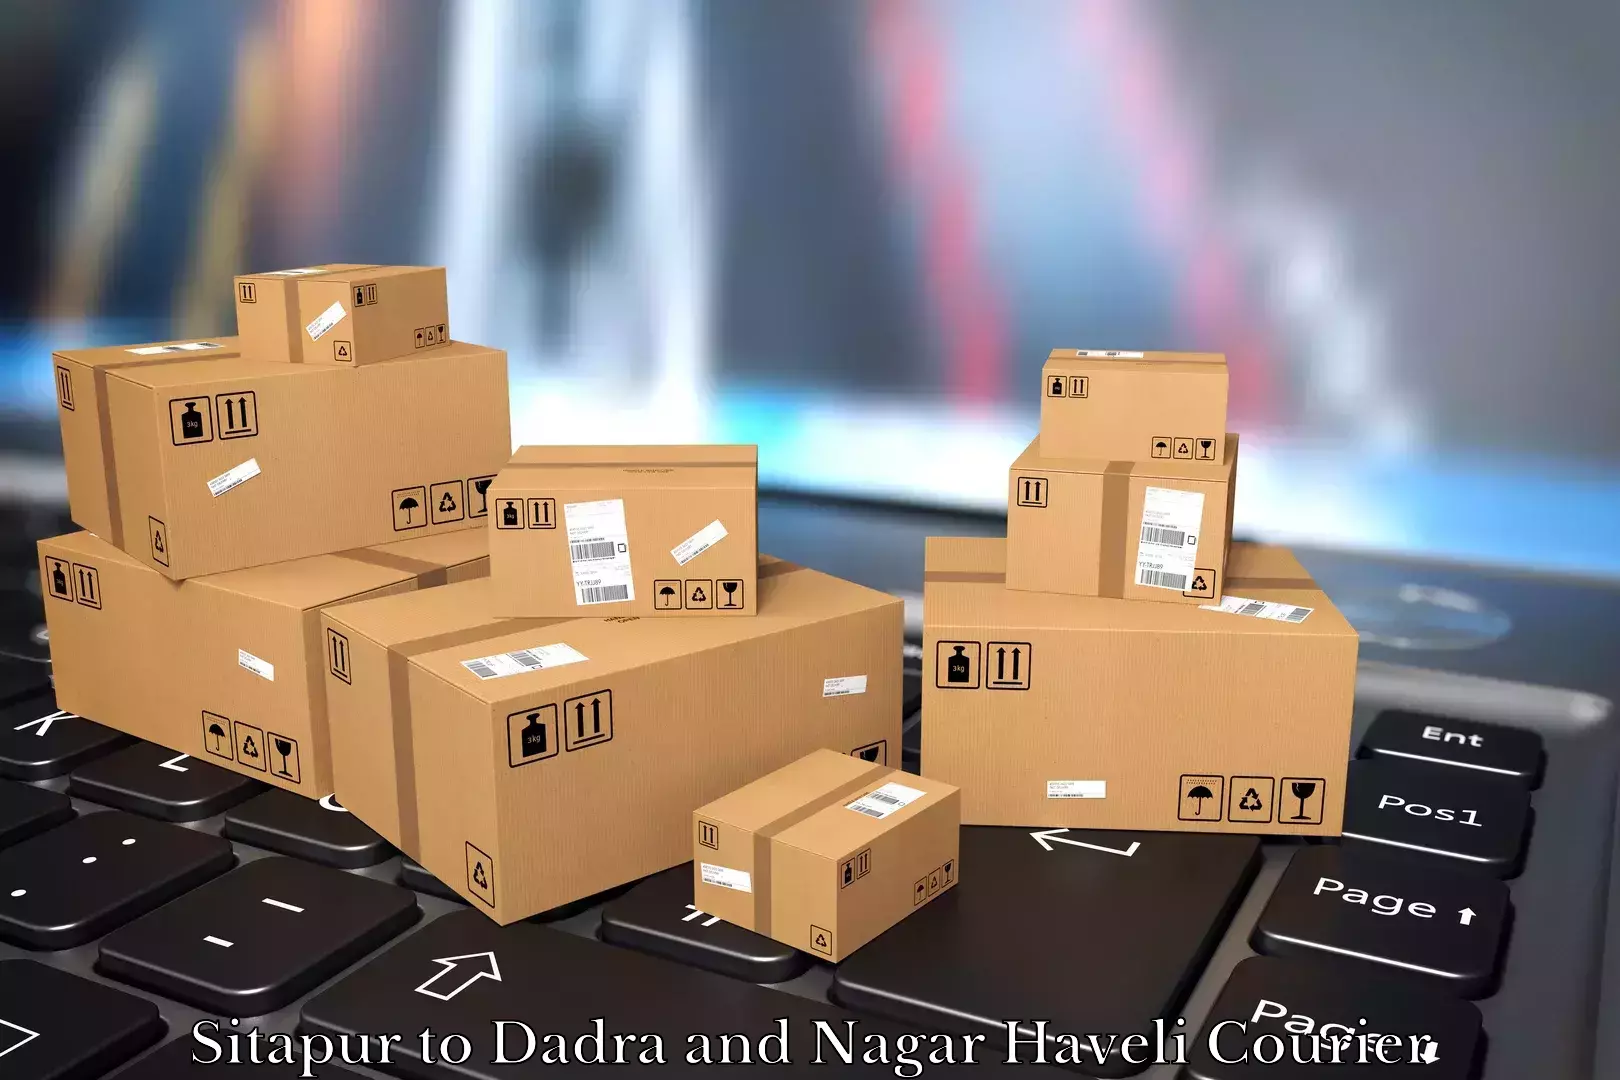 Professional moving assistance Sitapur to Dadra and Nagar Haveli